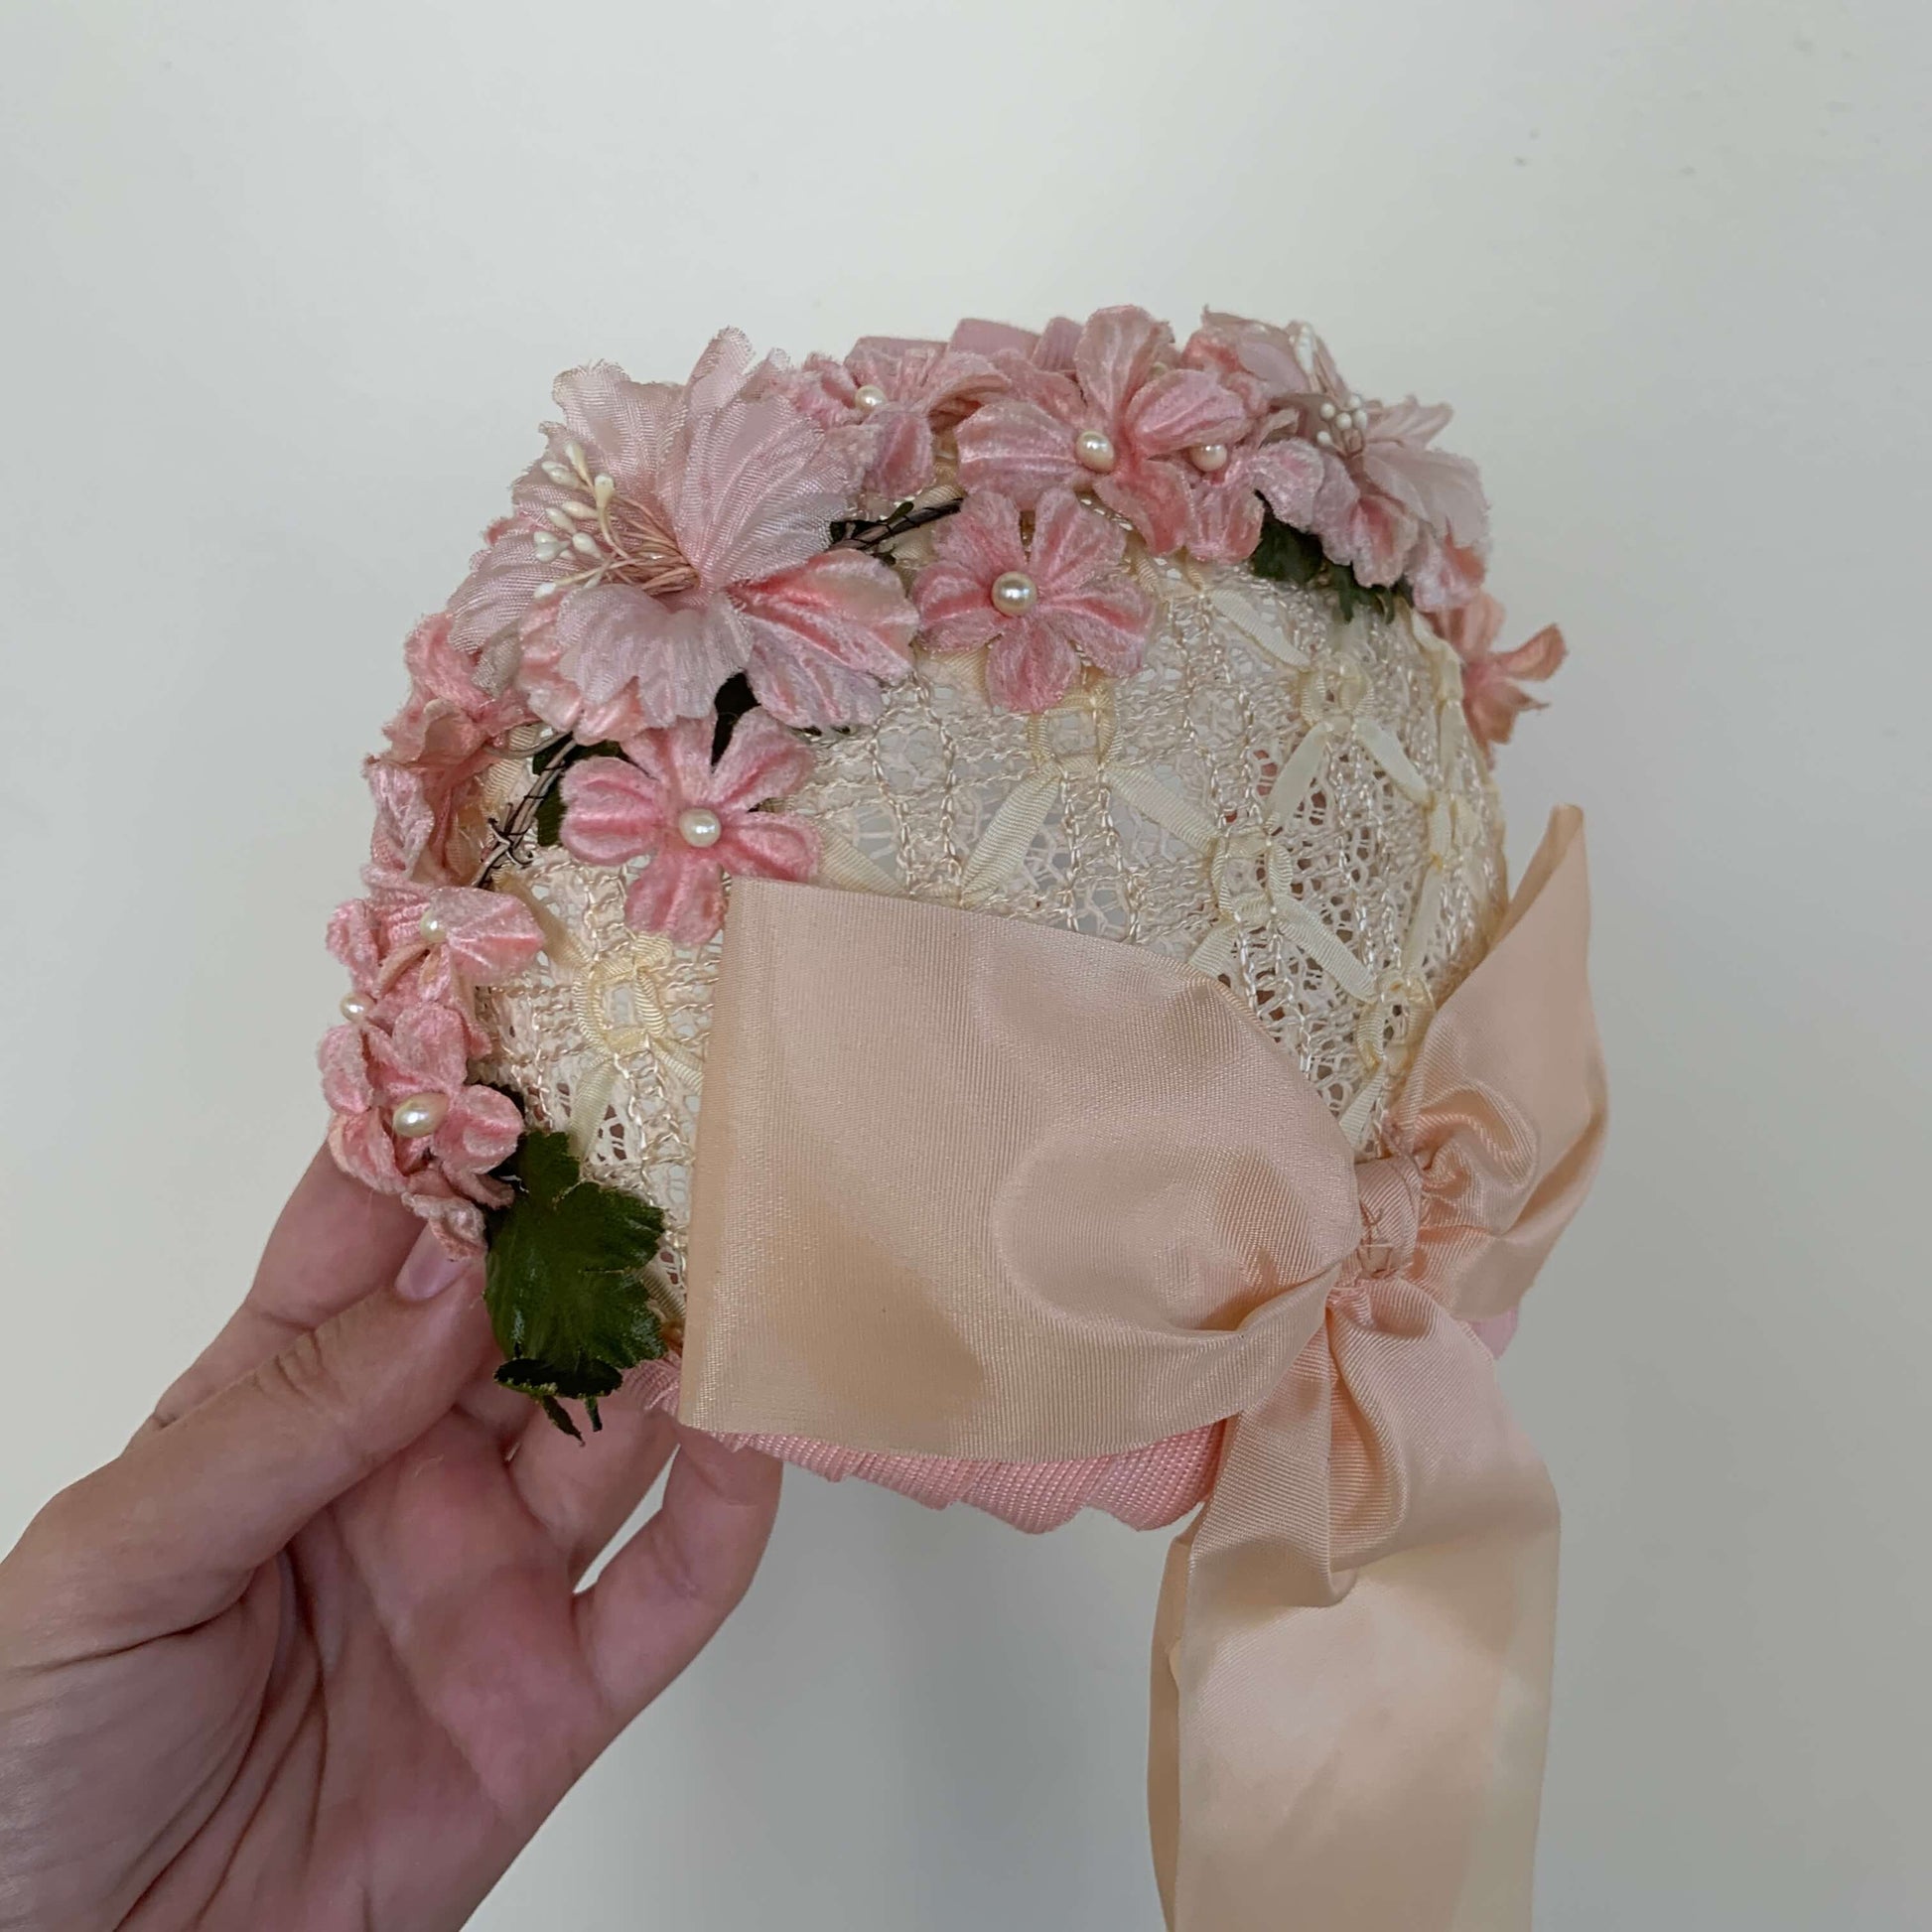 vintage juliette cap made of white lace with pink velvet flowers and white pearl stamens